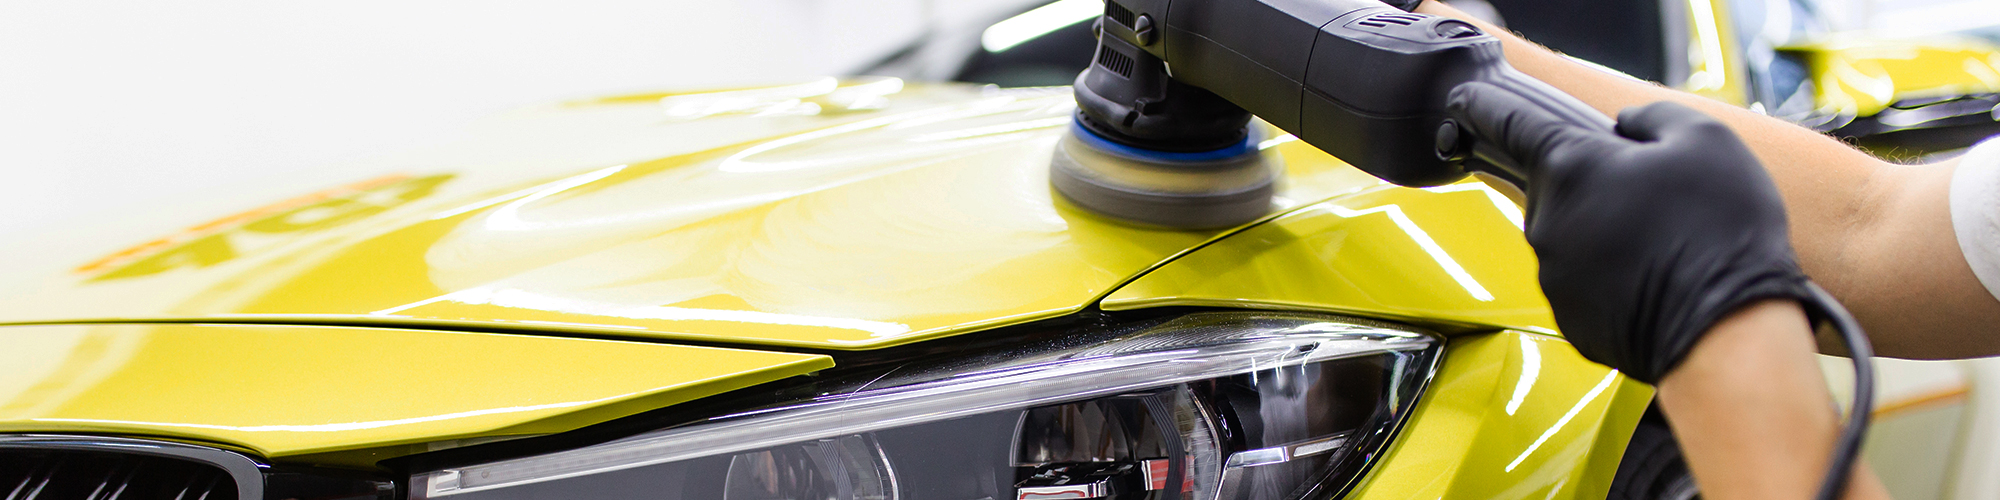 Yellow Sports Car Being Polished